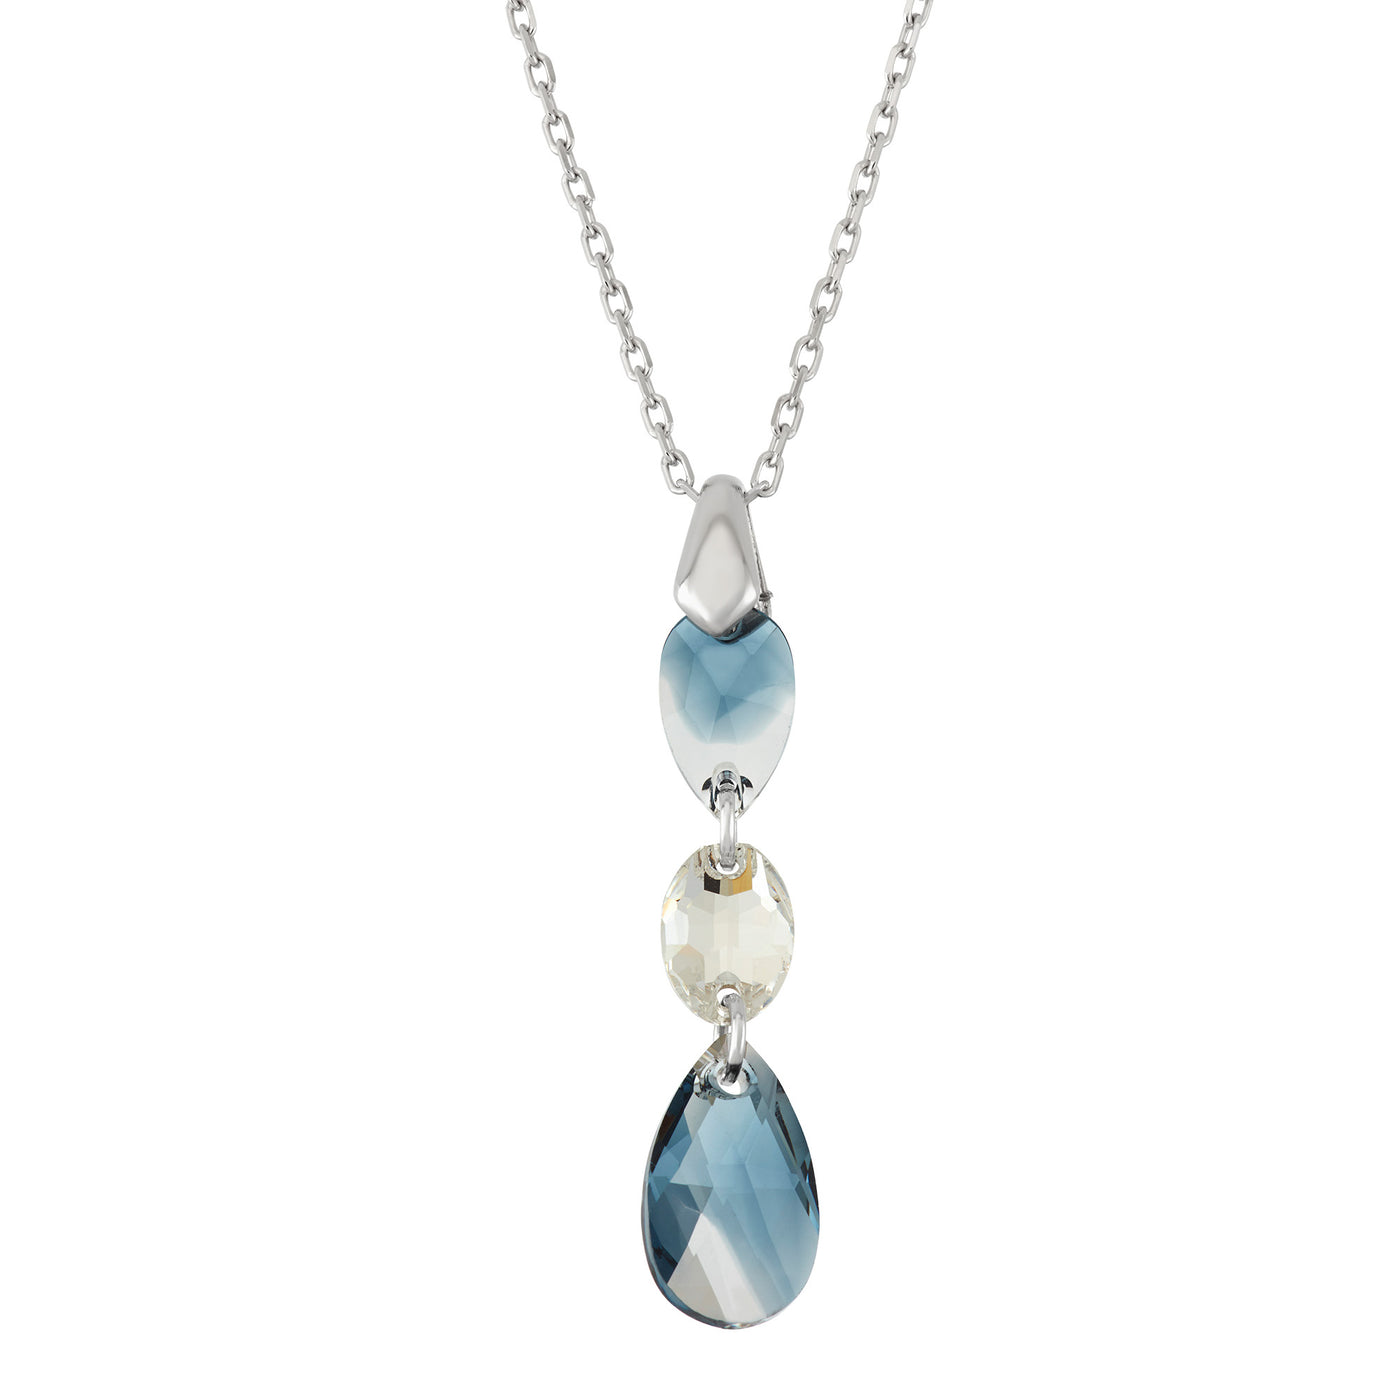 Rebecca Sloane Silver Tear Drop Oval Pendant With Blue Crystal